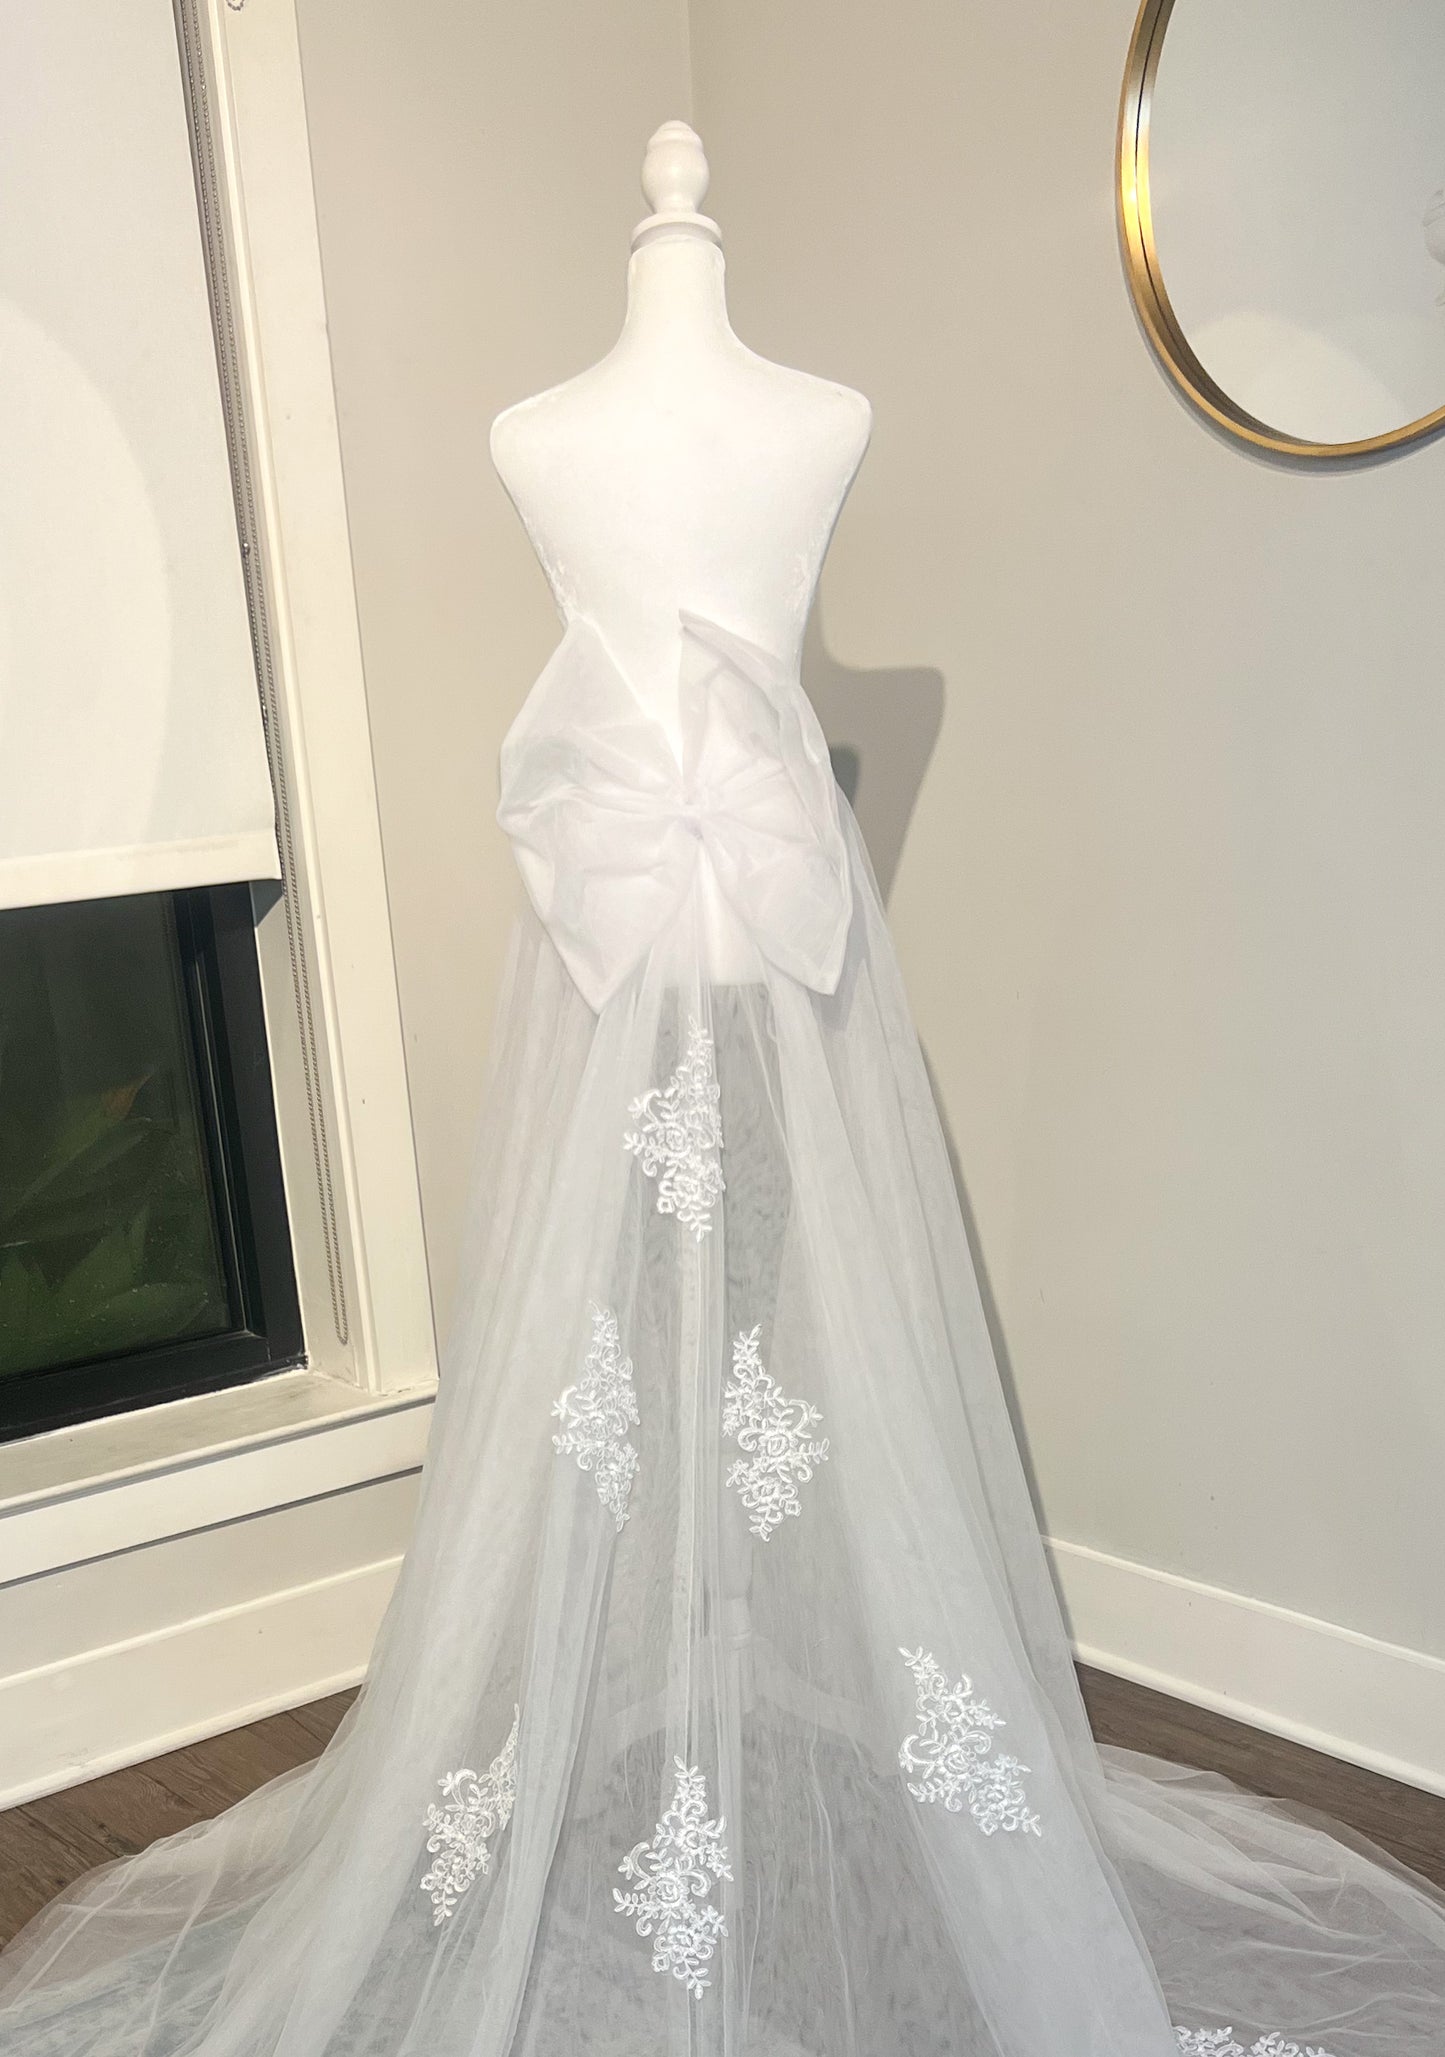 Lace Detail with Chiffon Bow Removable Wedding train without Belt